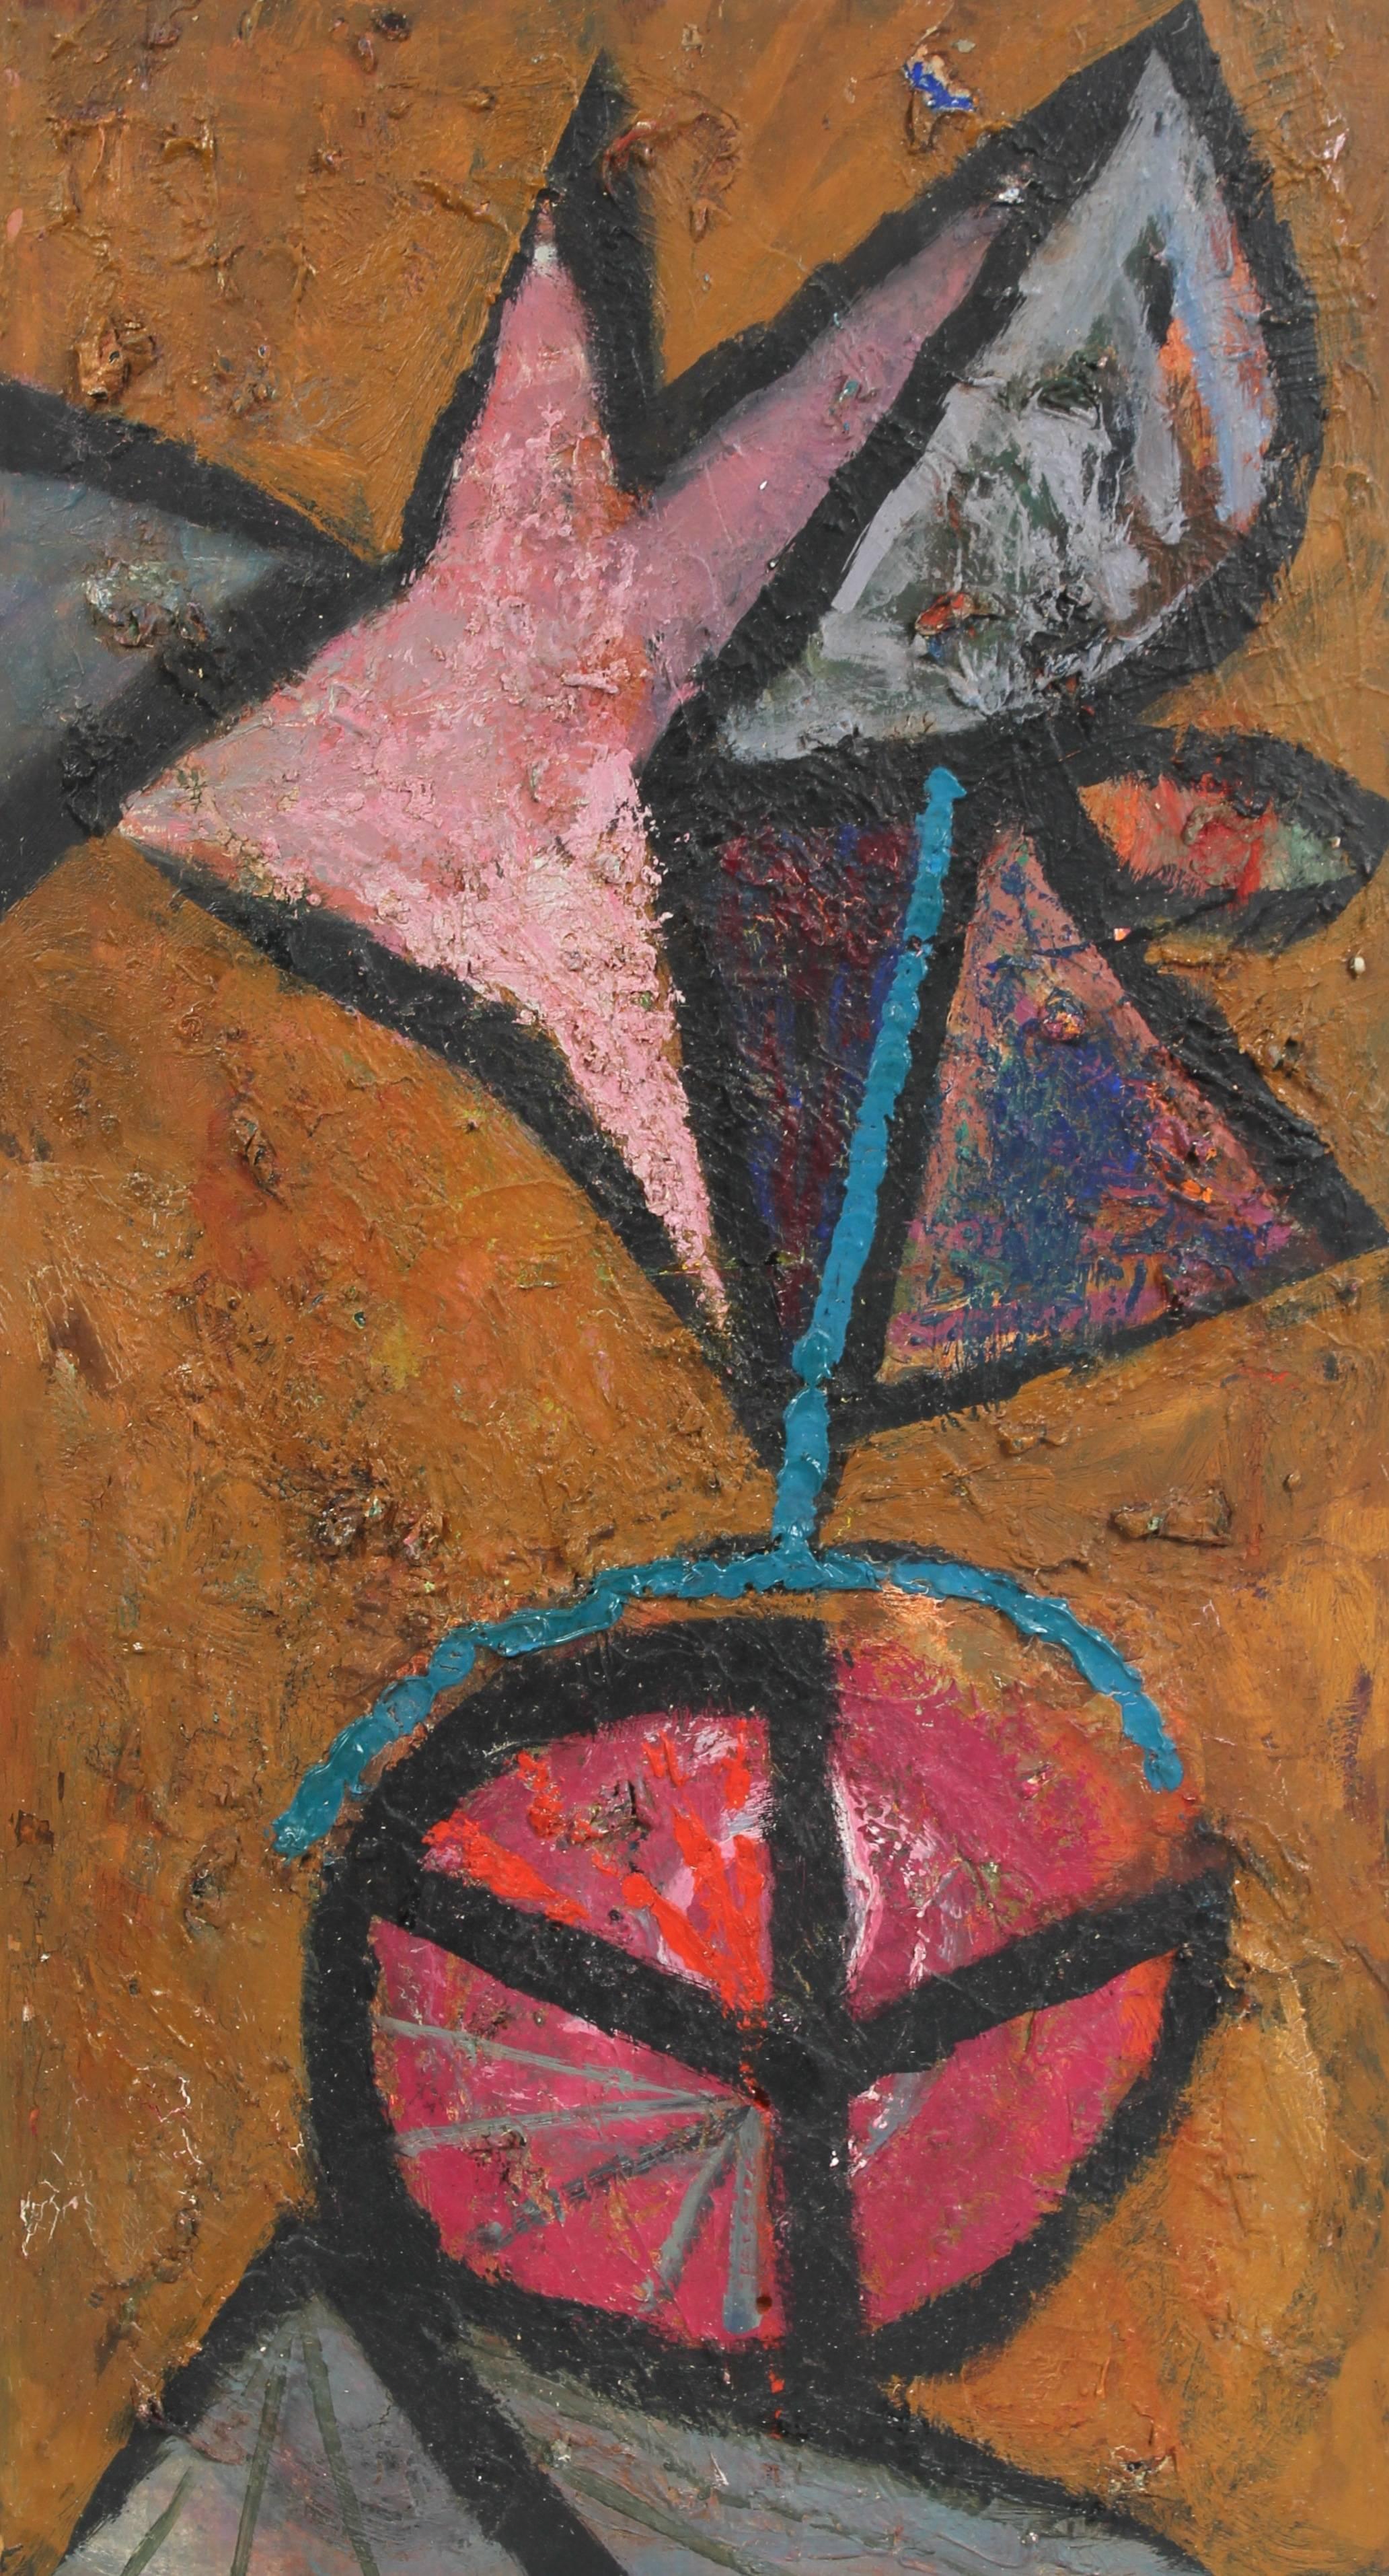 This circa 1950s oil on wood panel textured abstract is by Bay Area painter, printmaker, and designer Calvin Anderson (b. 1925).  He studied at CCAC and Art Center College in the 1940s and worked as a commercial art director in San Francisco for 40